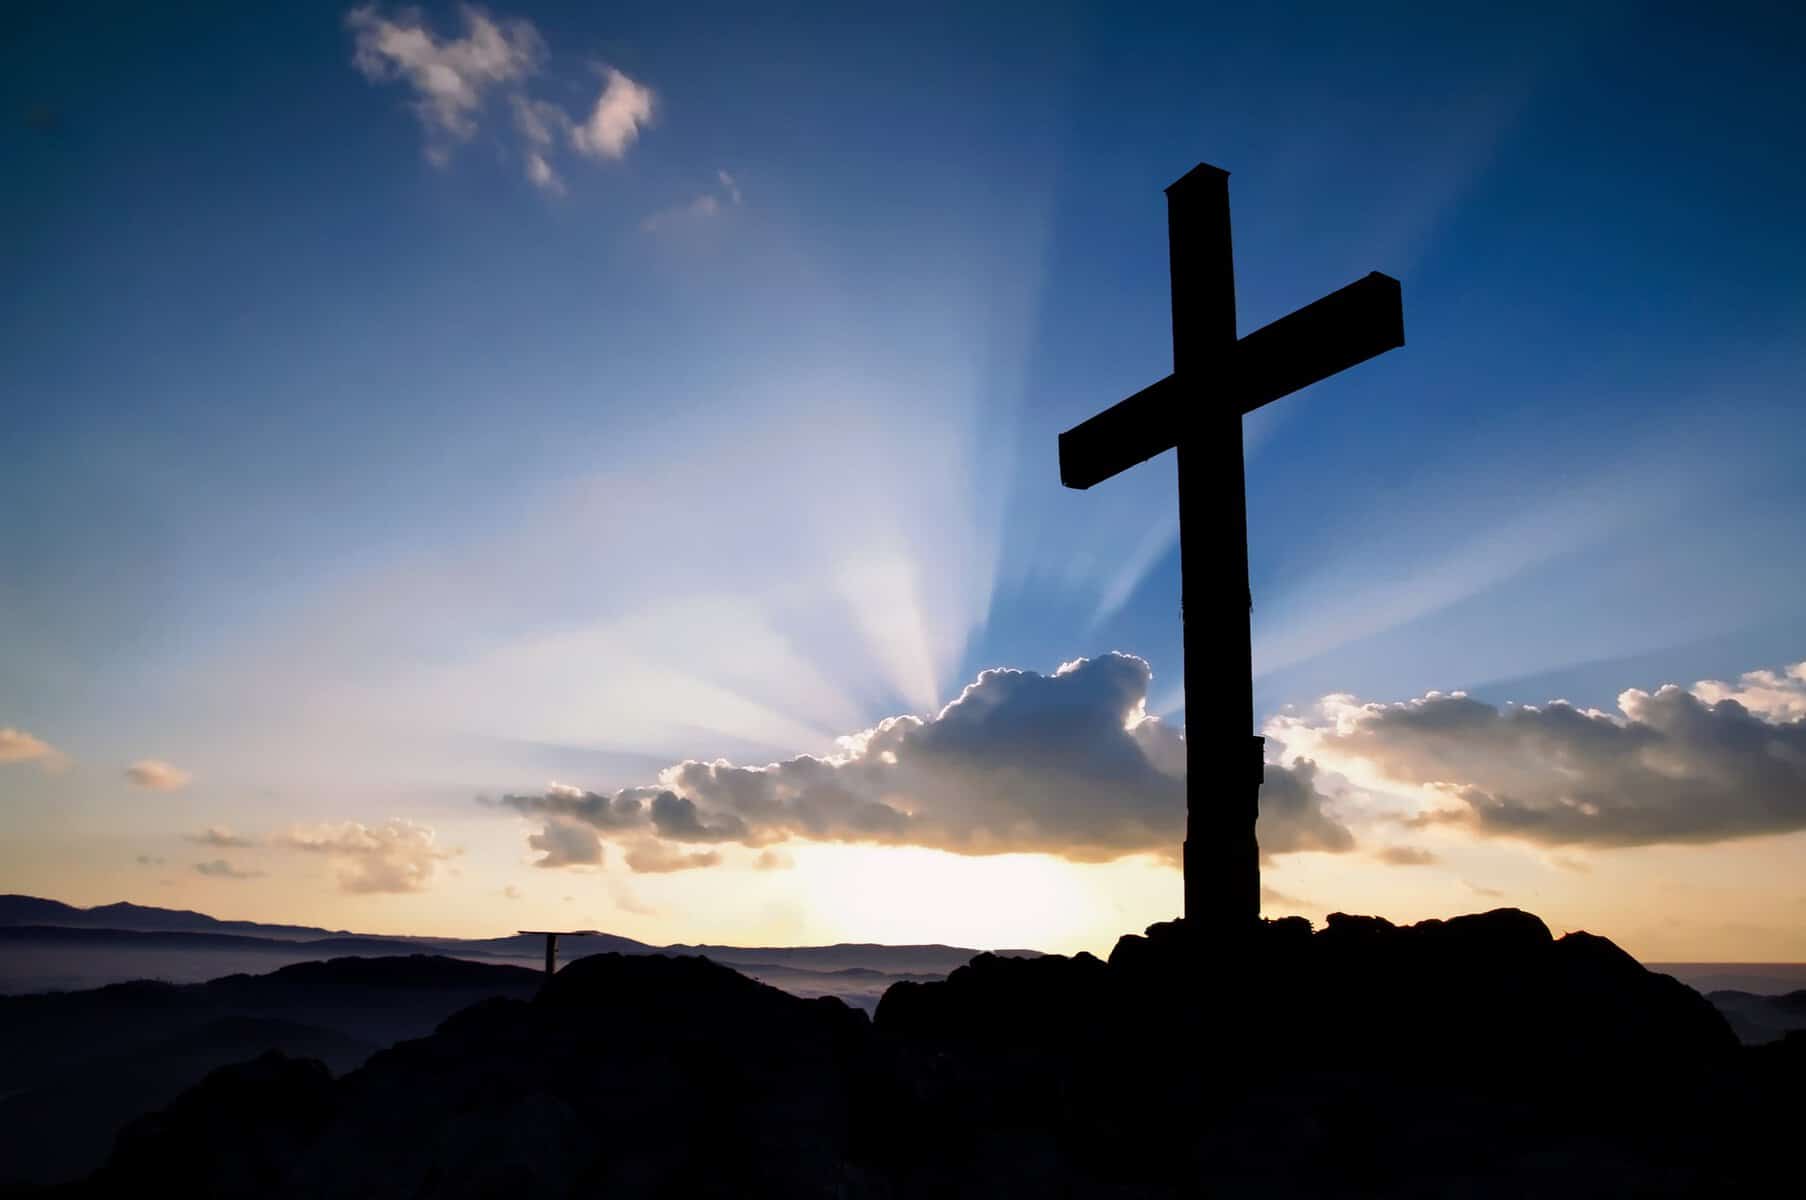 The silhouette of a cross is seen with the rising sun behind it.